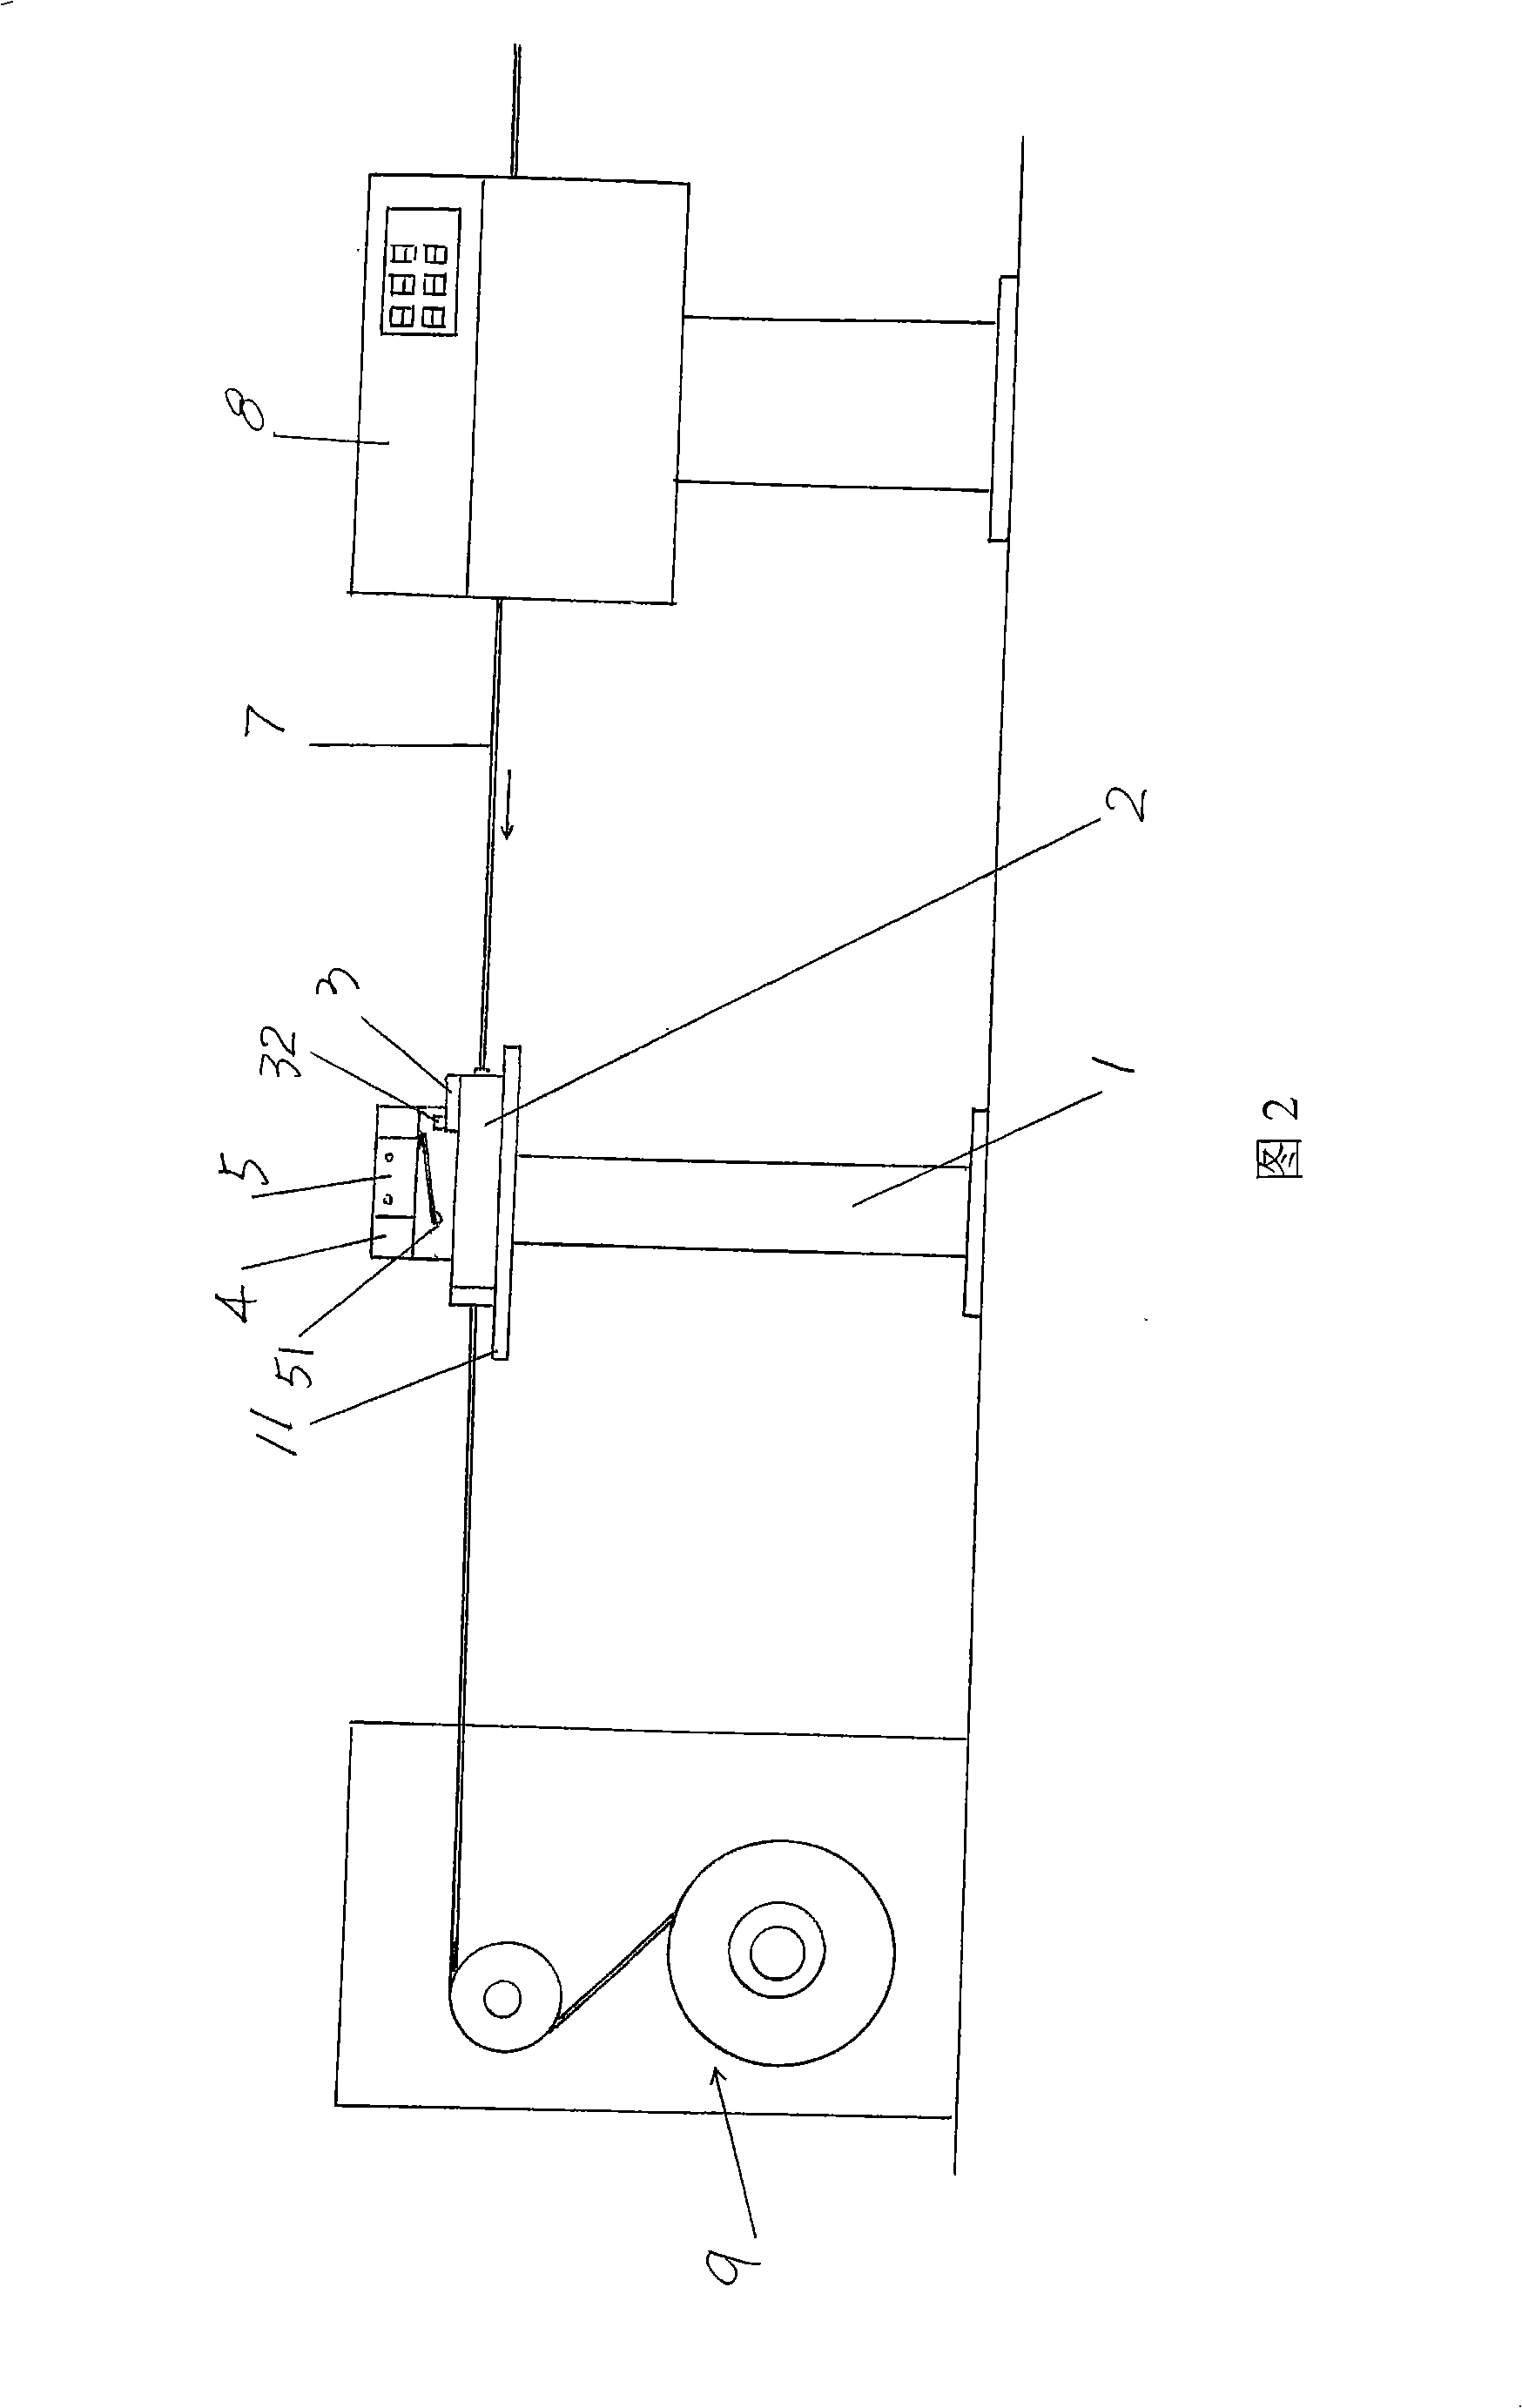 Lead detection device